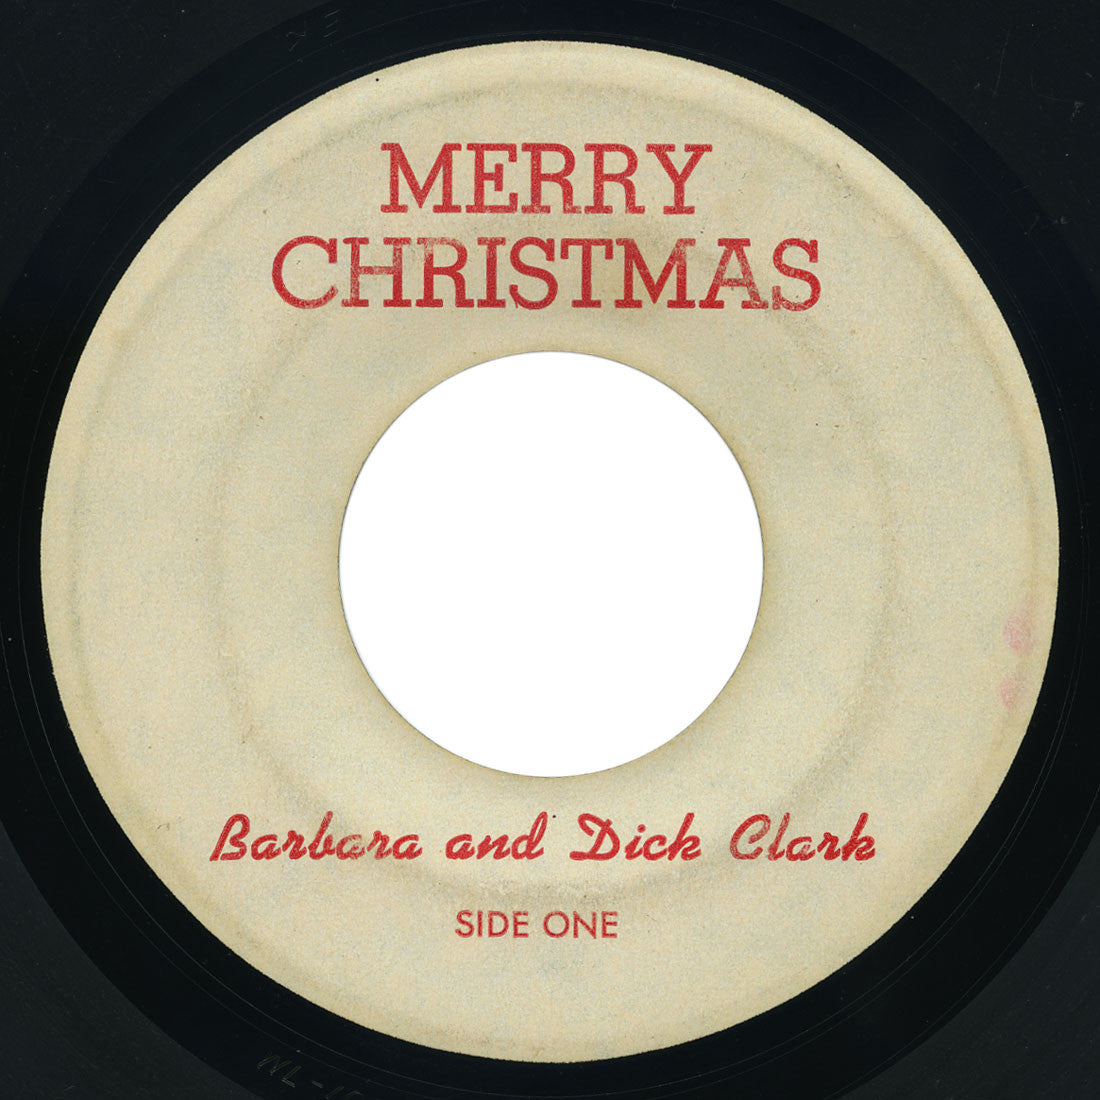 Merry Christmas from Barbara and Dick Clark